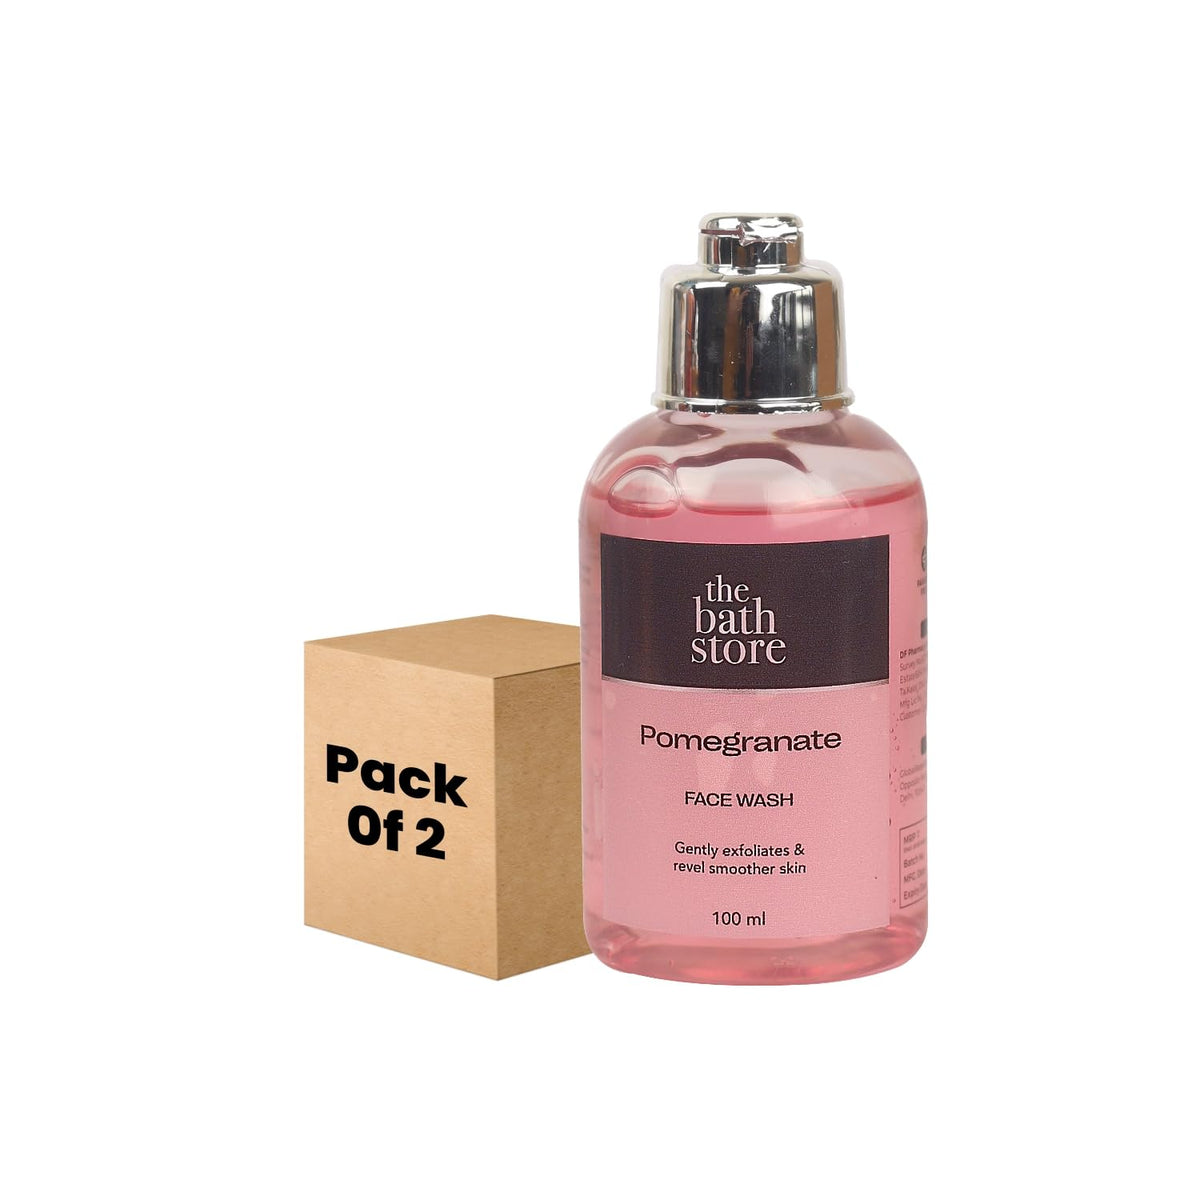 The Bath Store Pomegranate Face Wash - Gentle Exfoliation | Deep Cleansing - 100ml (Pack of 2)